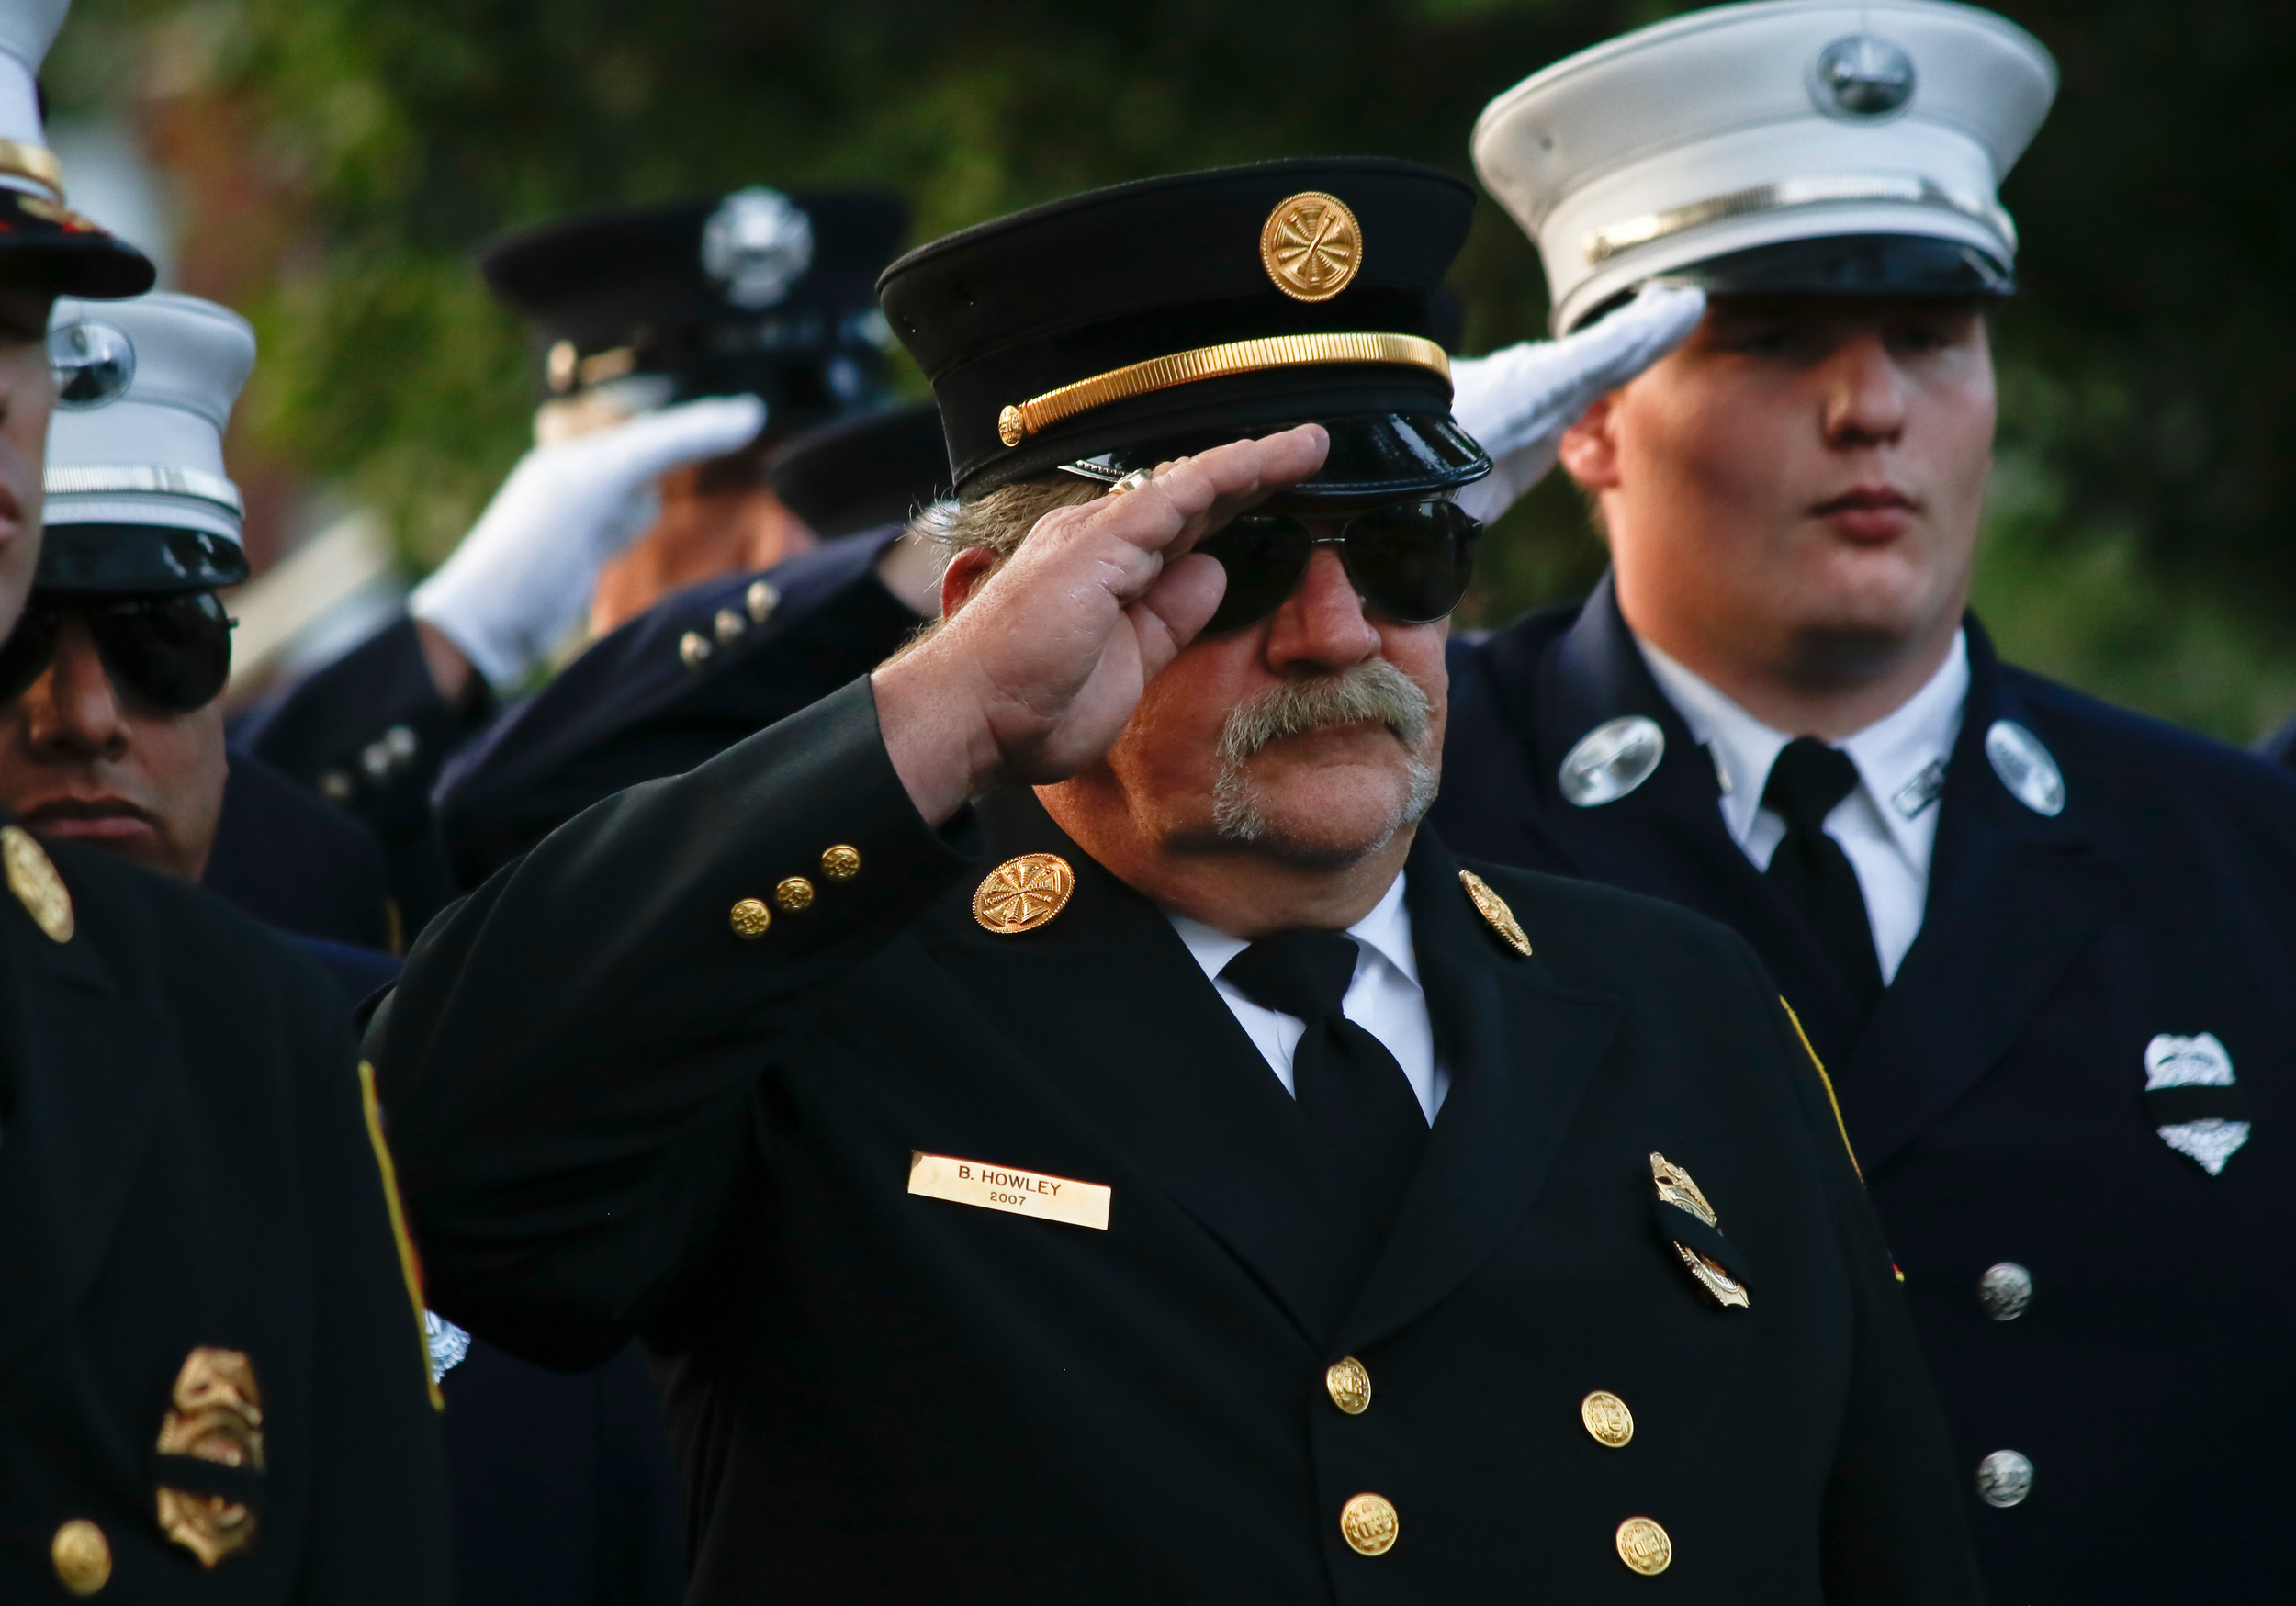 Brian Howley, center, along with the rest of the fire department, saluted during the playing of taps.